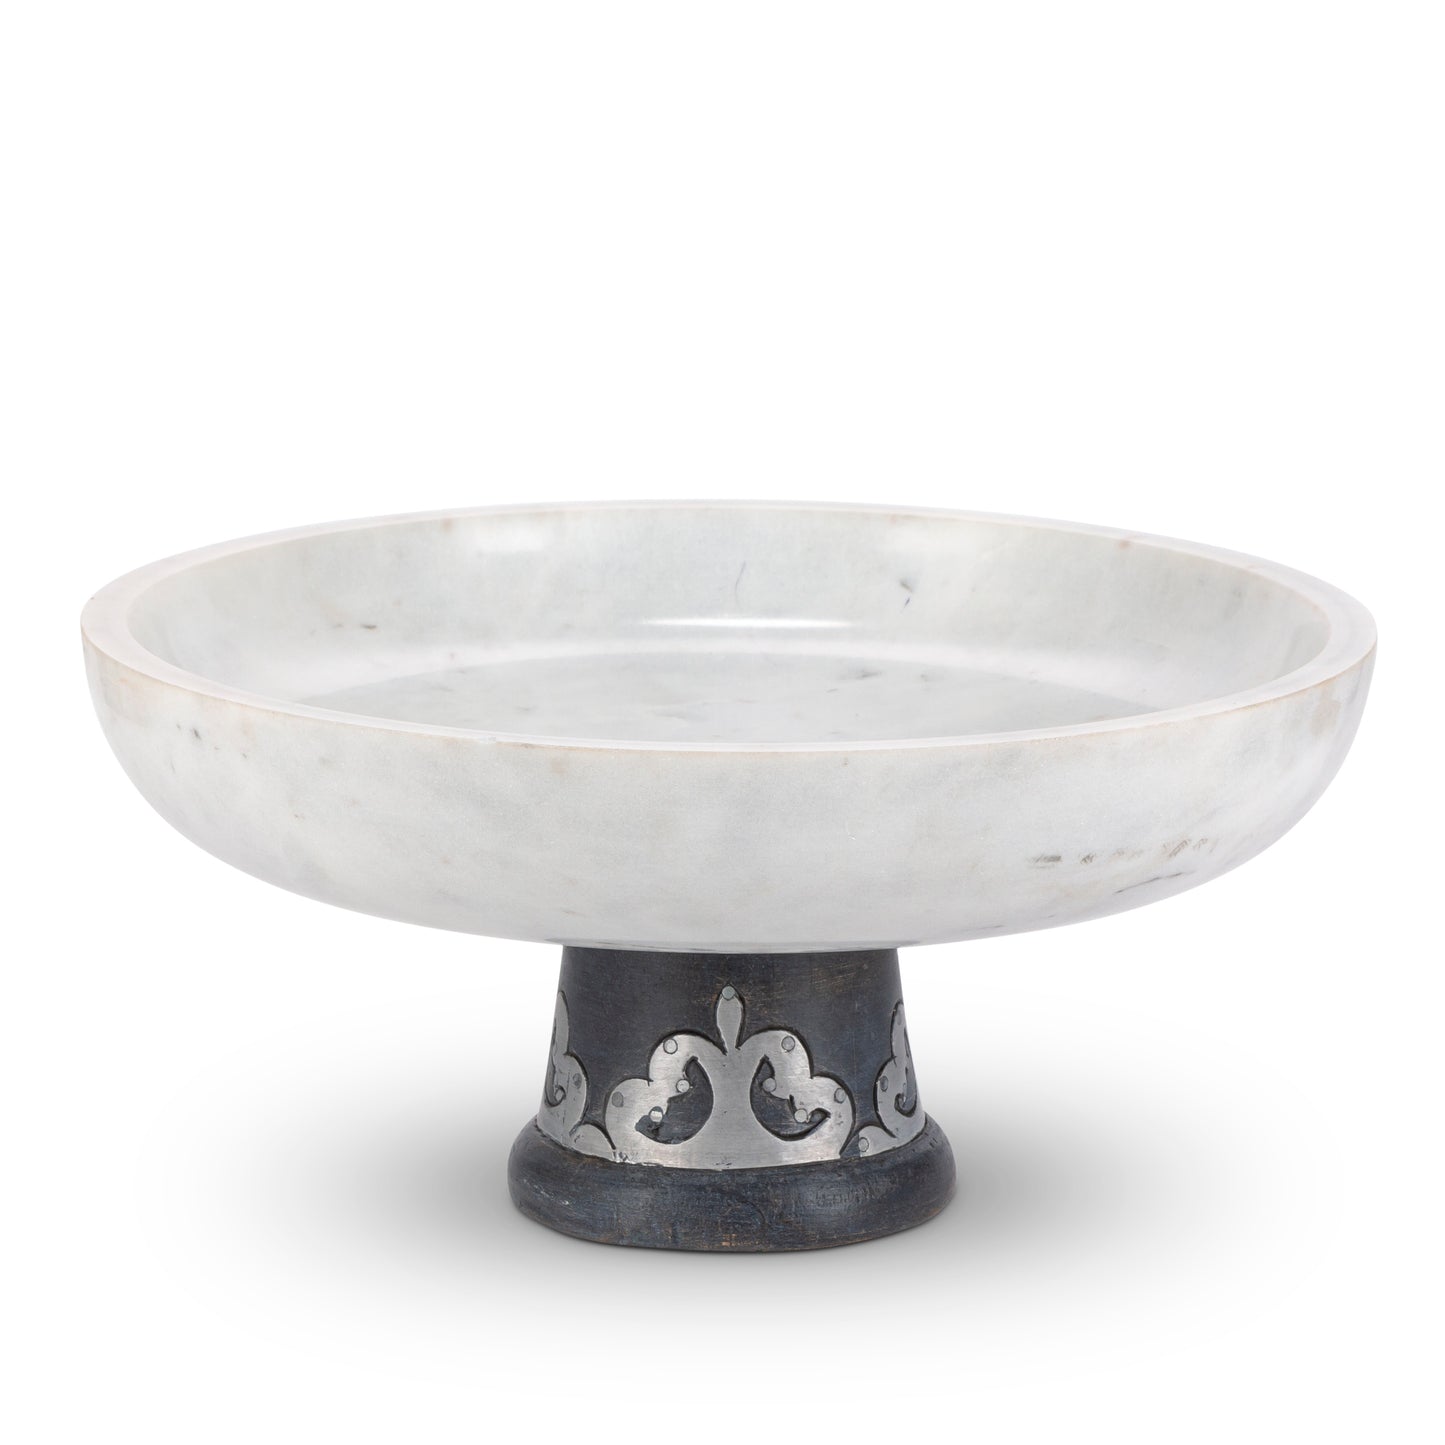 Gerson Company White Marble Bowl On Gray Washed Metal Inlay Pedestal